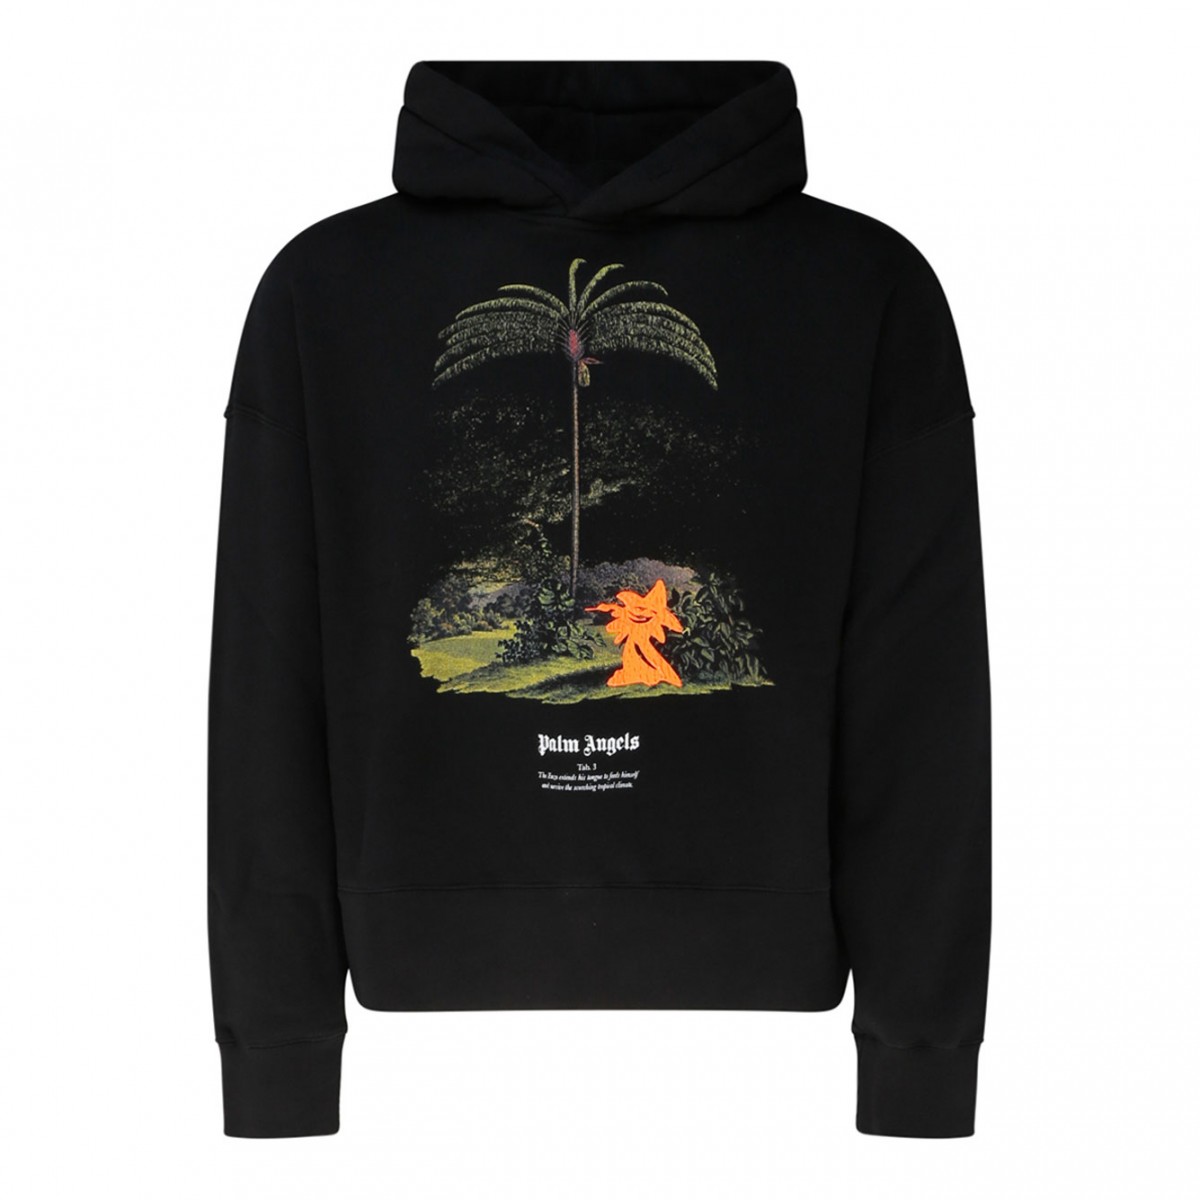 Black Cotton "Enzo From The Tropic" Hoodie